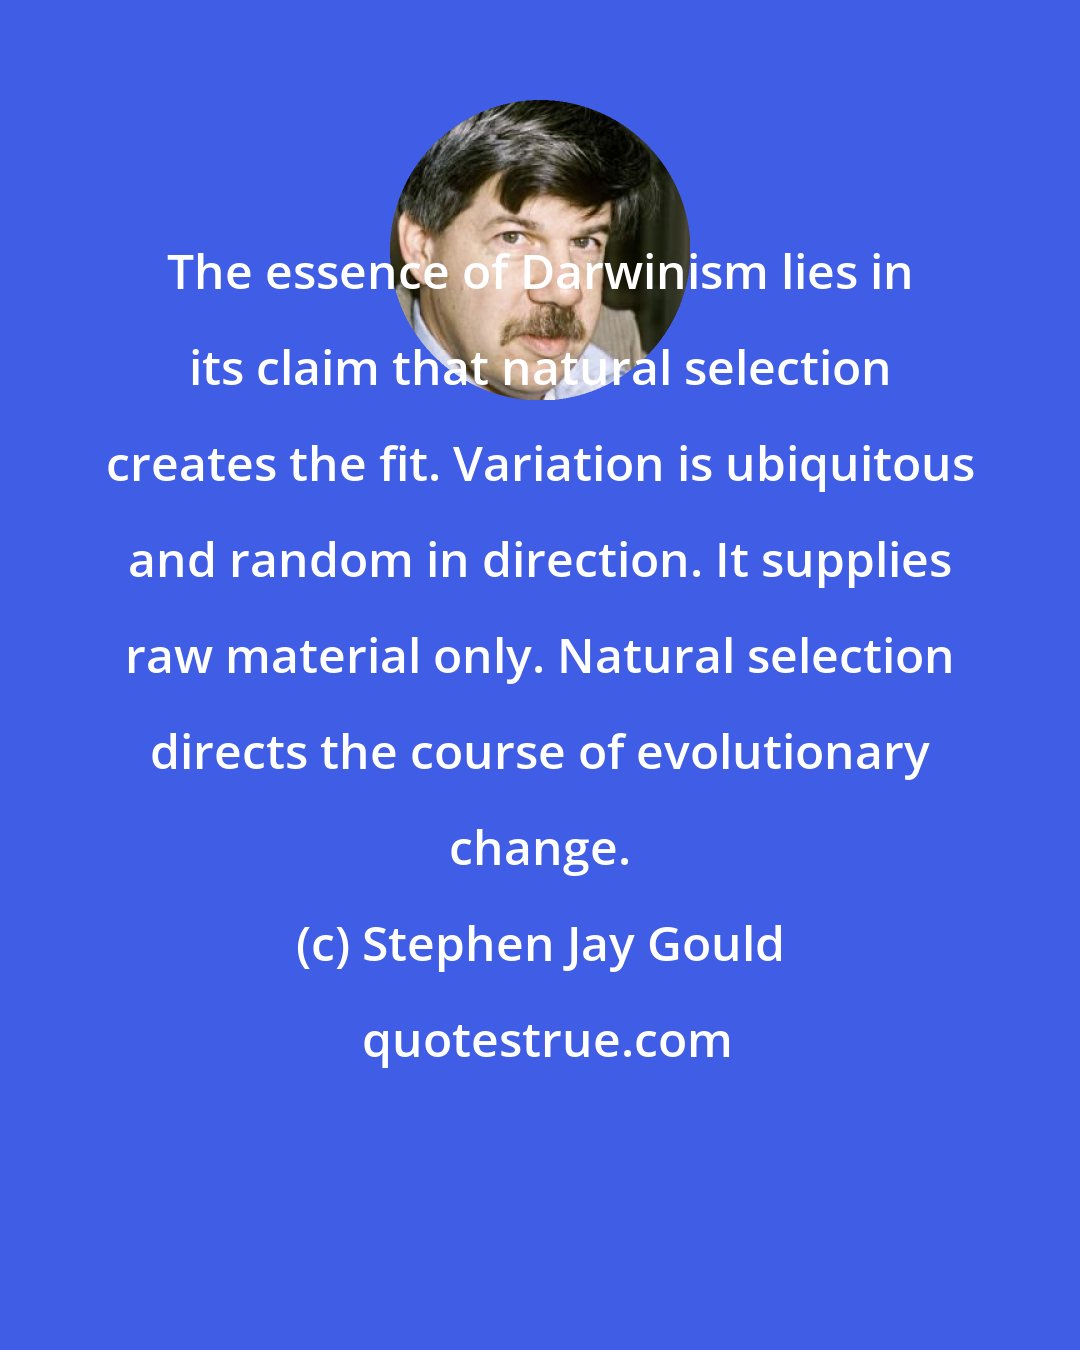 Stephen Jay Gould: The essence of Darwinism lies in its claim that natural selection creates the fit. Variation is ubiquitous and random in direction. It supplies raw material only. Natural selection directs the course of evolutionary change.